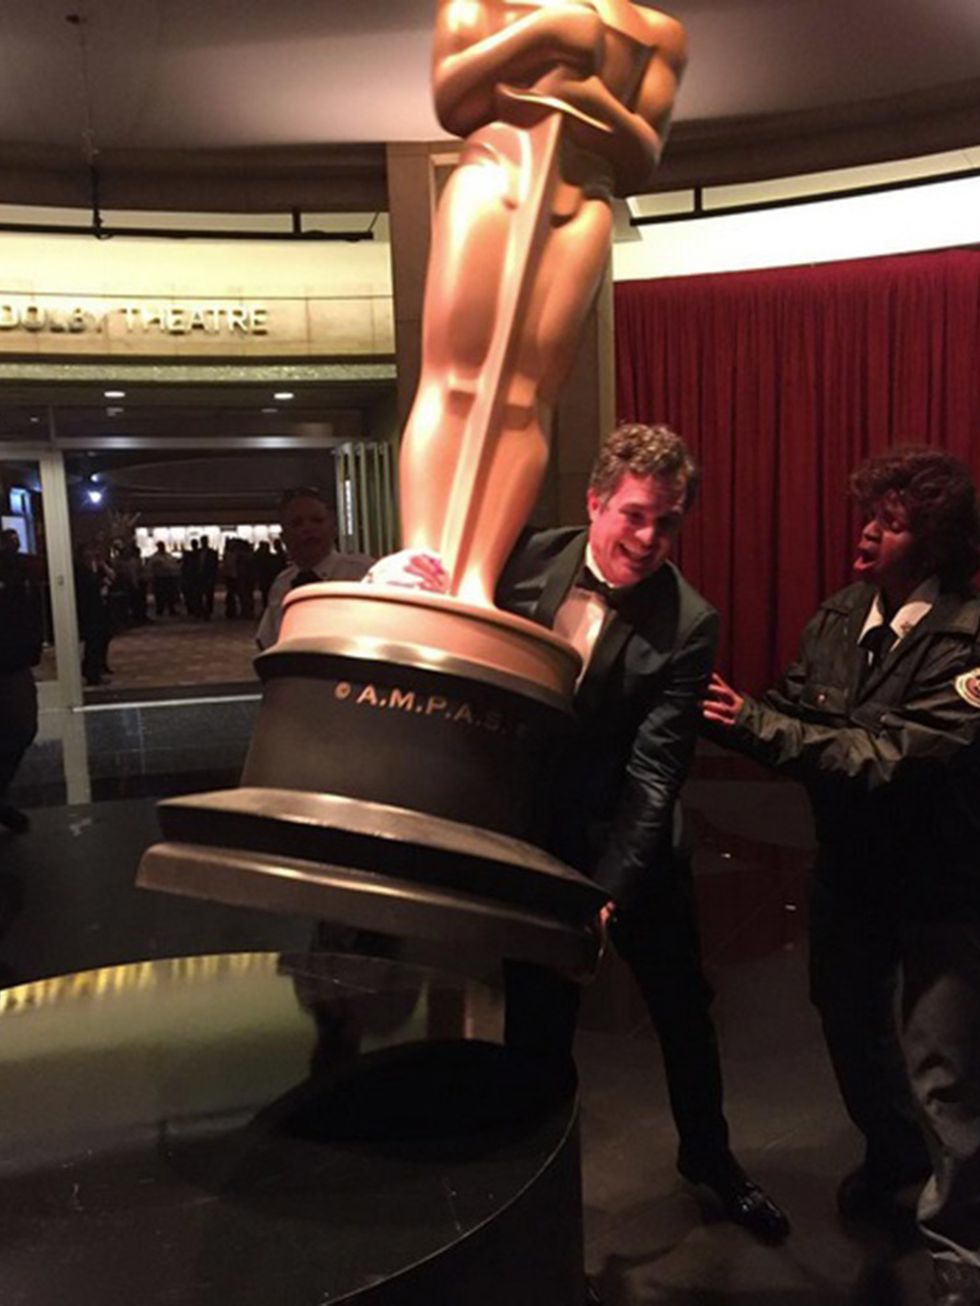 'I tried to make off with the big one. Security stopped me. Darn it. #oscars'